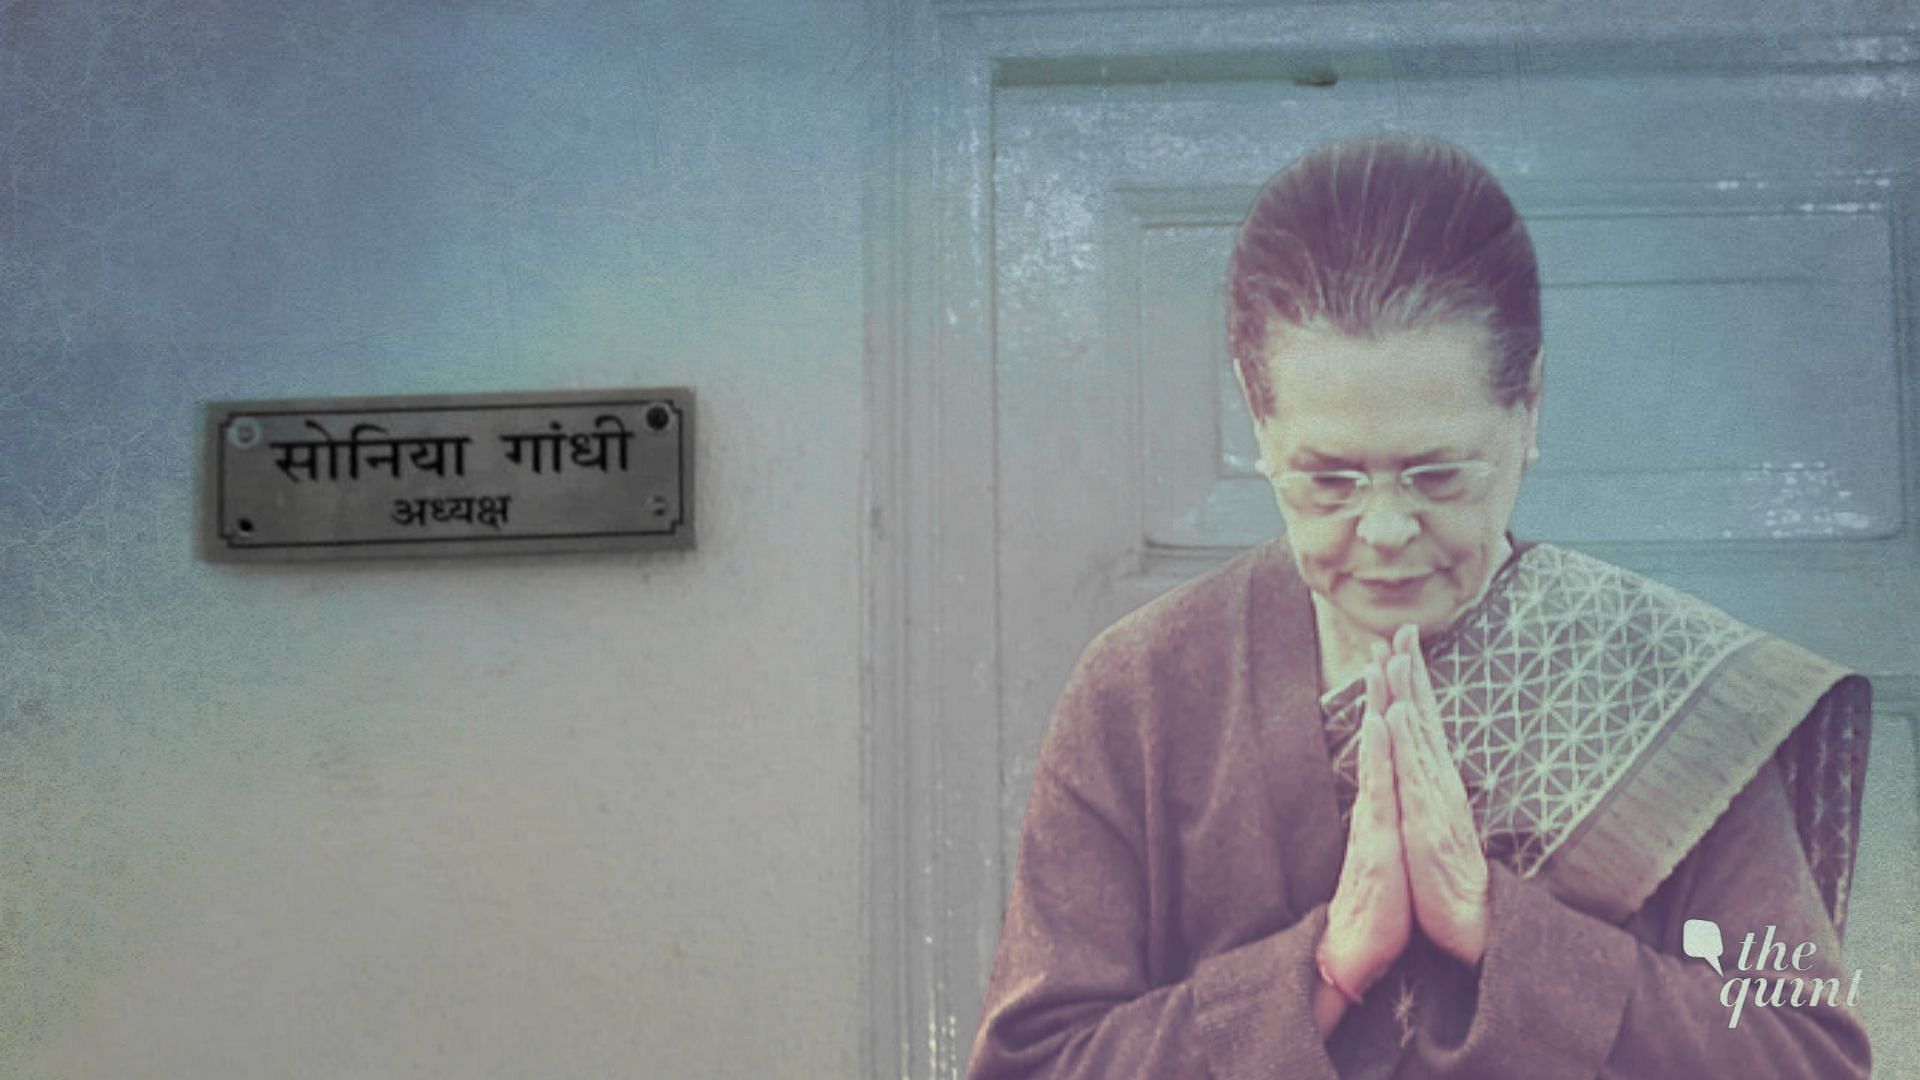 Sonia Gandhi has returned as the interim chief of the Congress party